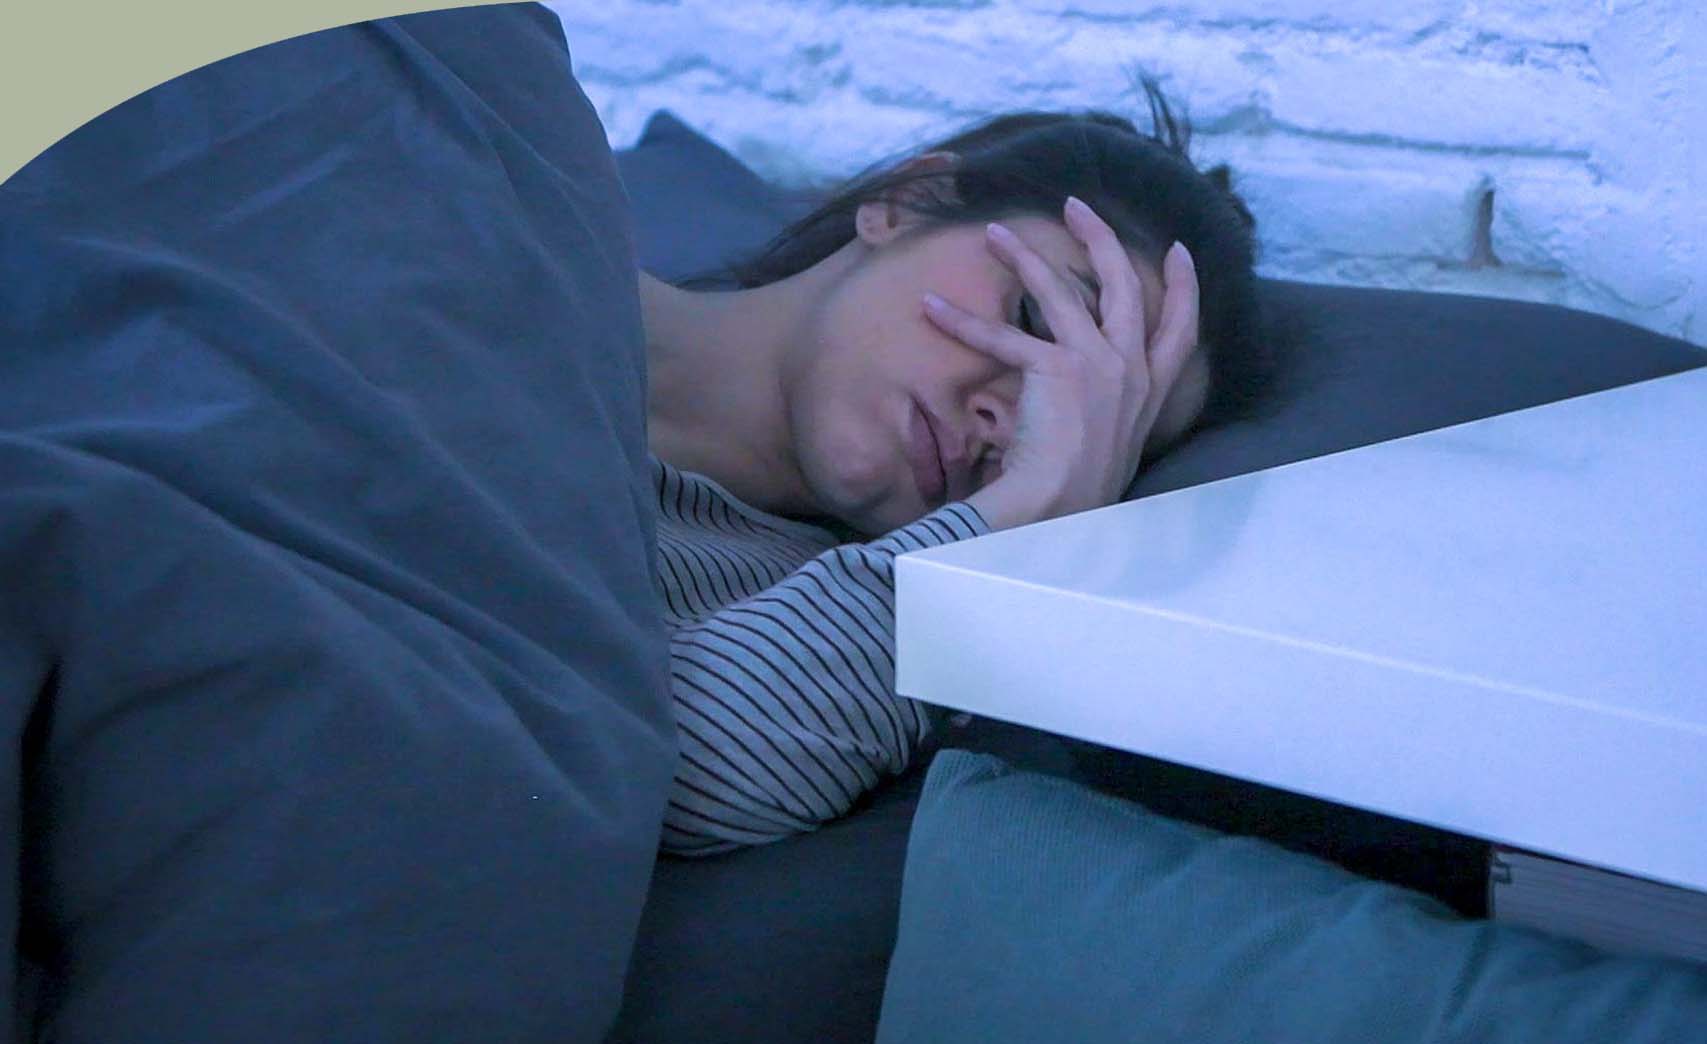 Can't Sleep? Learn about treating Insomnia